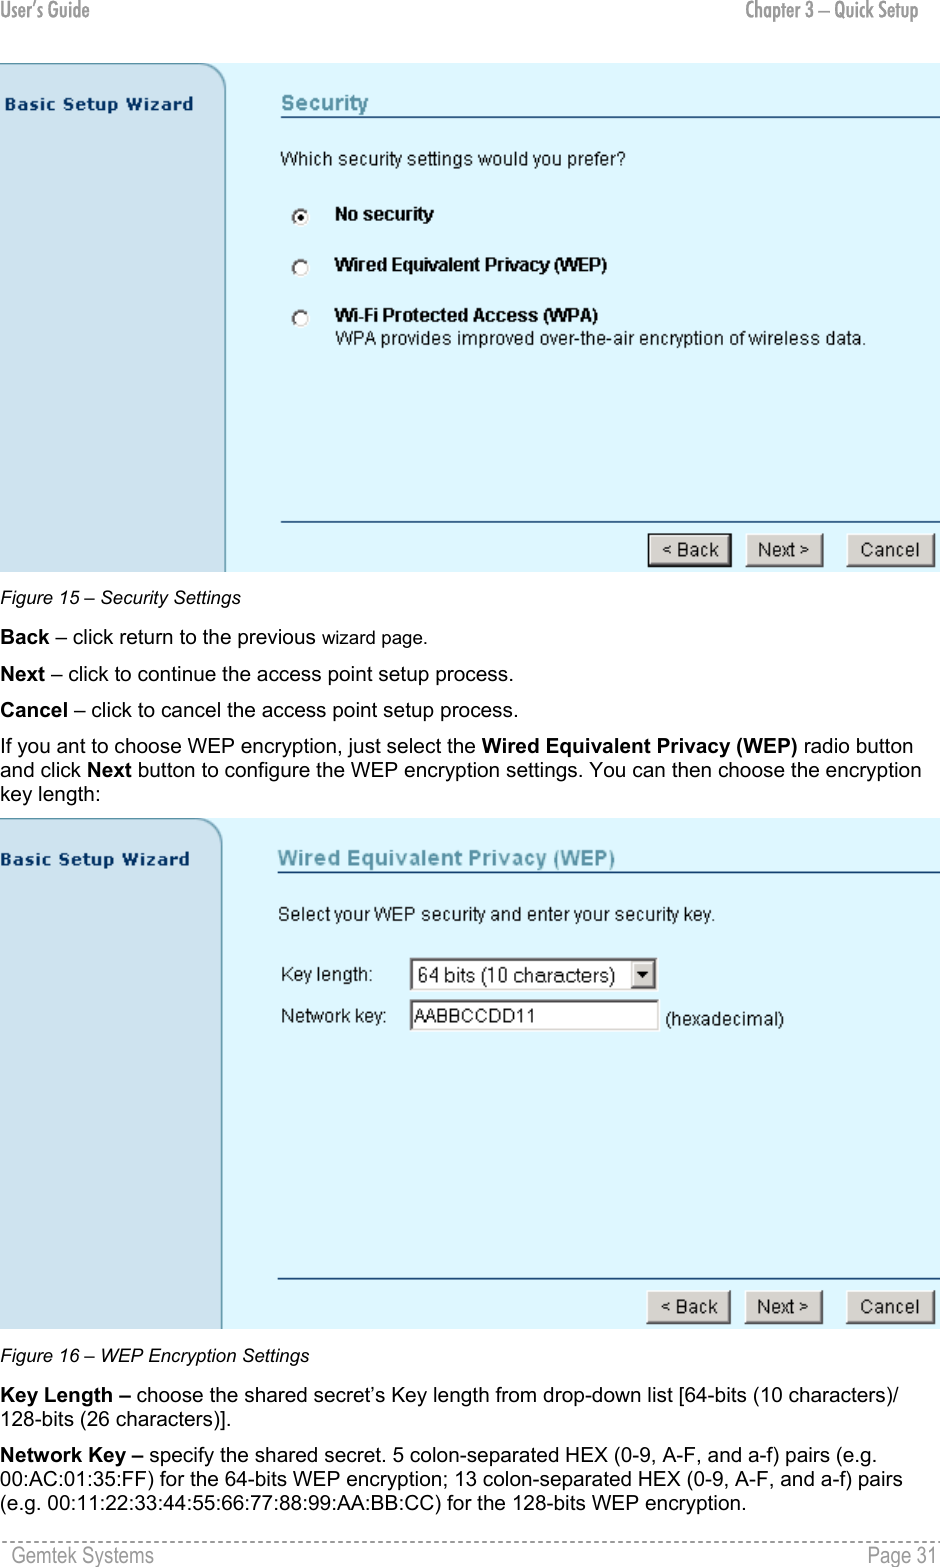 User’s Guide  Chapter 3 – Quick Setup  Figure 15 – Security Settings Back – click return to the previous wizard page. Next – click to continue the access point setup process. Cancel – click to cancel the access point setup process. If you ant to choose WEP encryption, just select the Wired Equivalent Privacy (WEP) radio button and click Next button to configure the WEP encryption settings. You can then choose the encryption key length:  Figure 16 – WEP Encryption Settings Key Length – choose the shared secret’s Key length from drop-down list [64-bits (10 characters)/ 128-bits (26 characters)]. Network Key – specify the shared secret. 5 colon-separated HEX (0-9, A-F, and a-f) pairs (e.g. 00:AC:01:35:FF) for the 64-bits WEP encryption; 13 colon-separated HEX (0-9, A-F, and a-f) pairs (e.g. 00:11:22:33:44:55:66:77:88:99:AA:BB:CC) for the 128-bits WEP encryption. Gemtek Systems    Page 31  